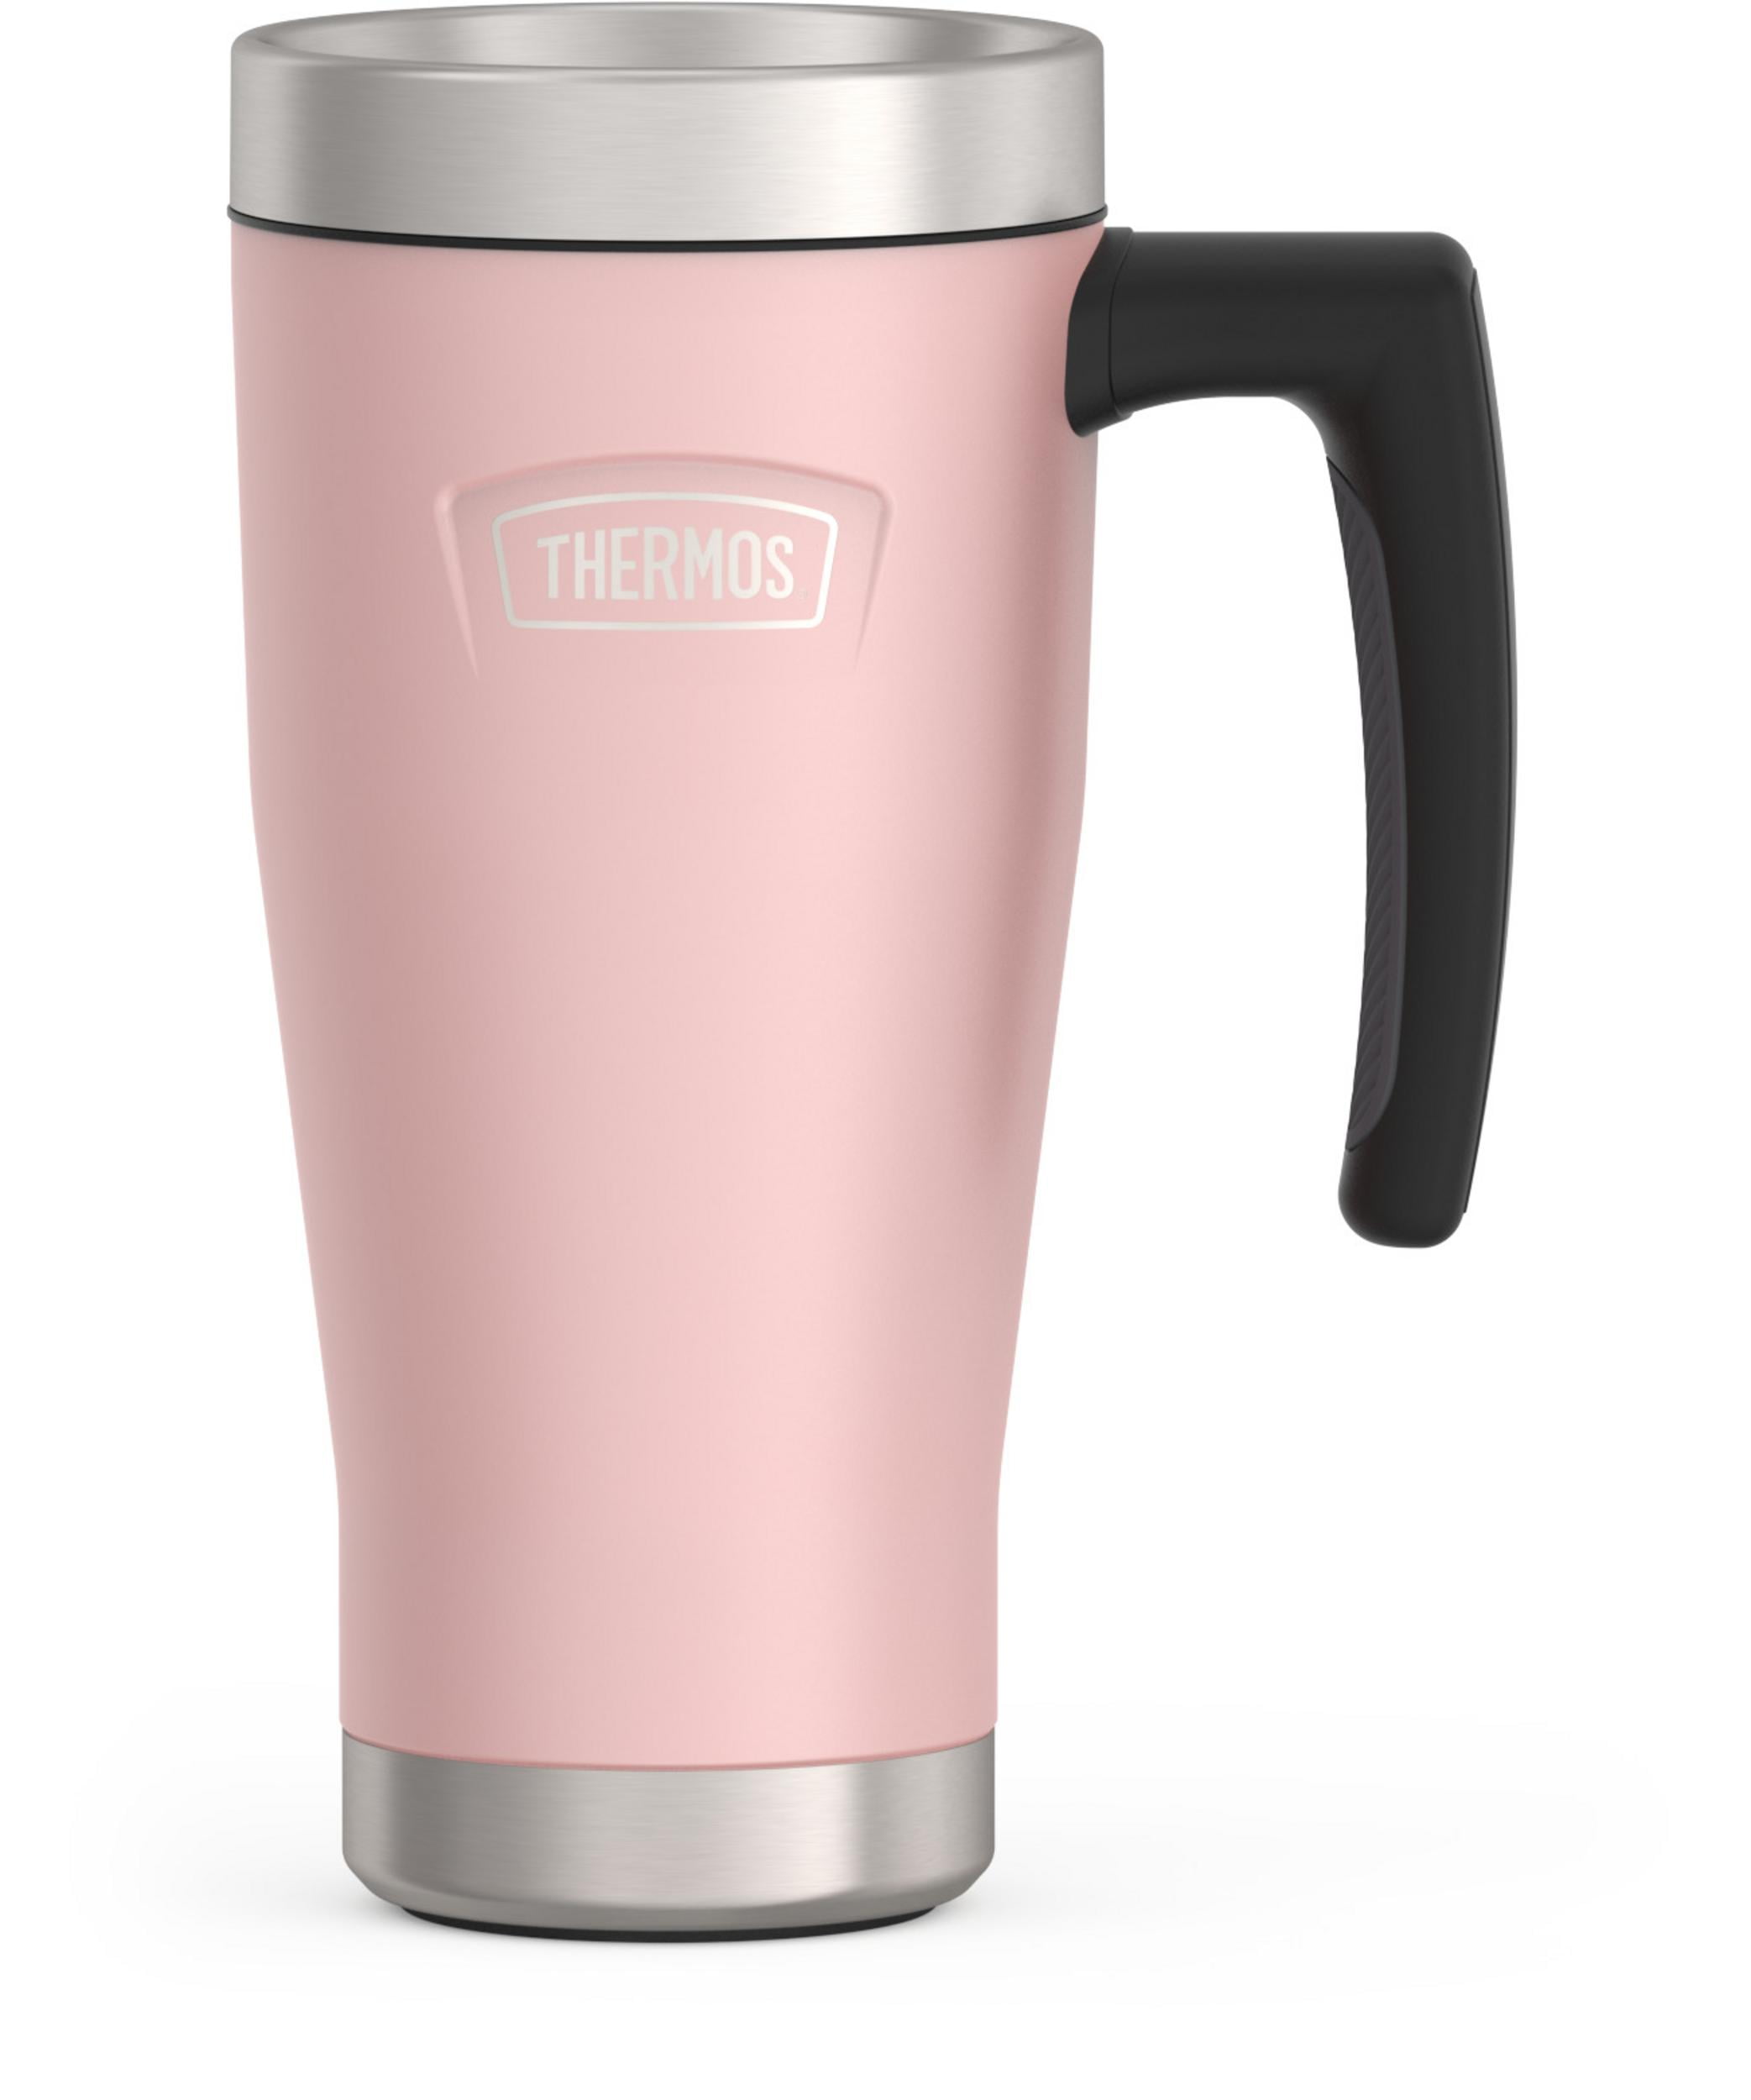 Thermos ICON Series Stainless Steel Vacuum Insulated Mug, 16oz, Matte  Stainless 